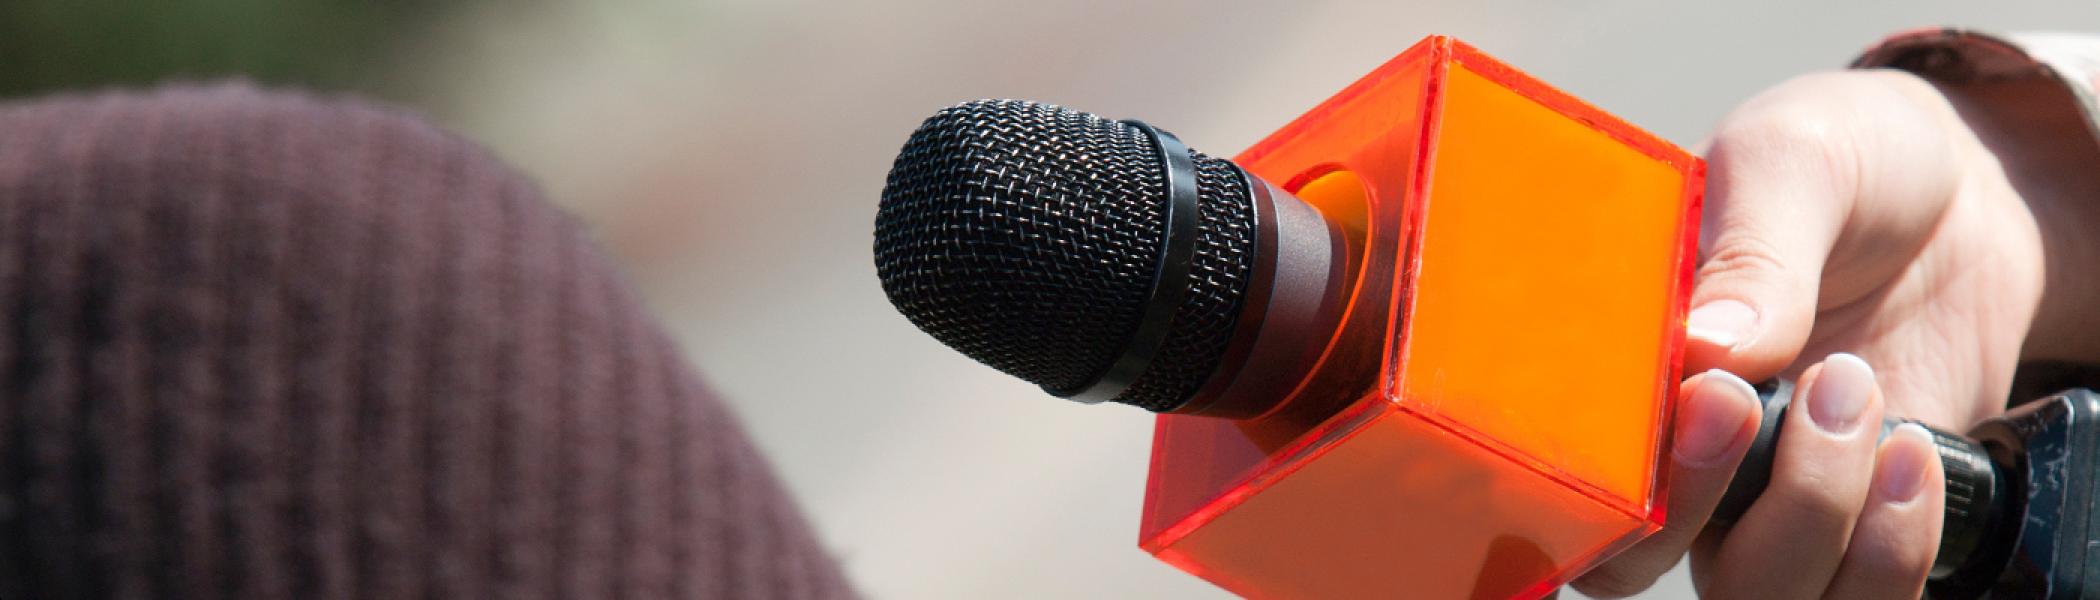 Microphone being held with orange square collar on it